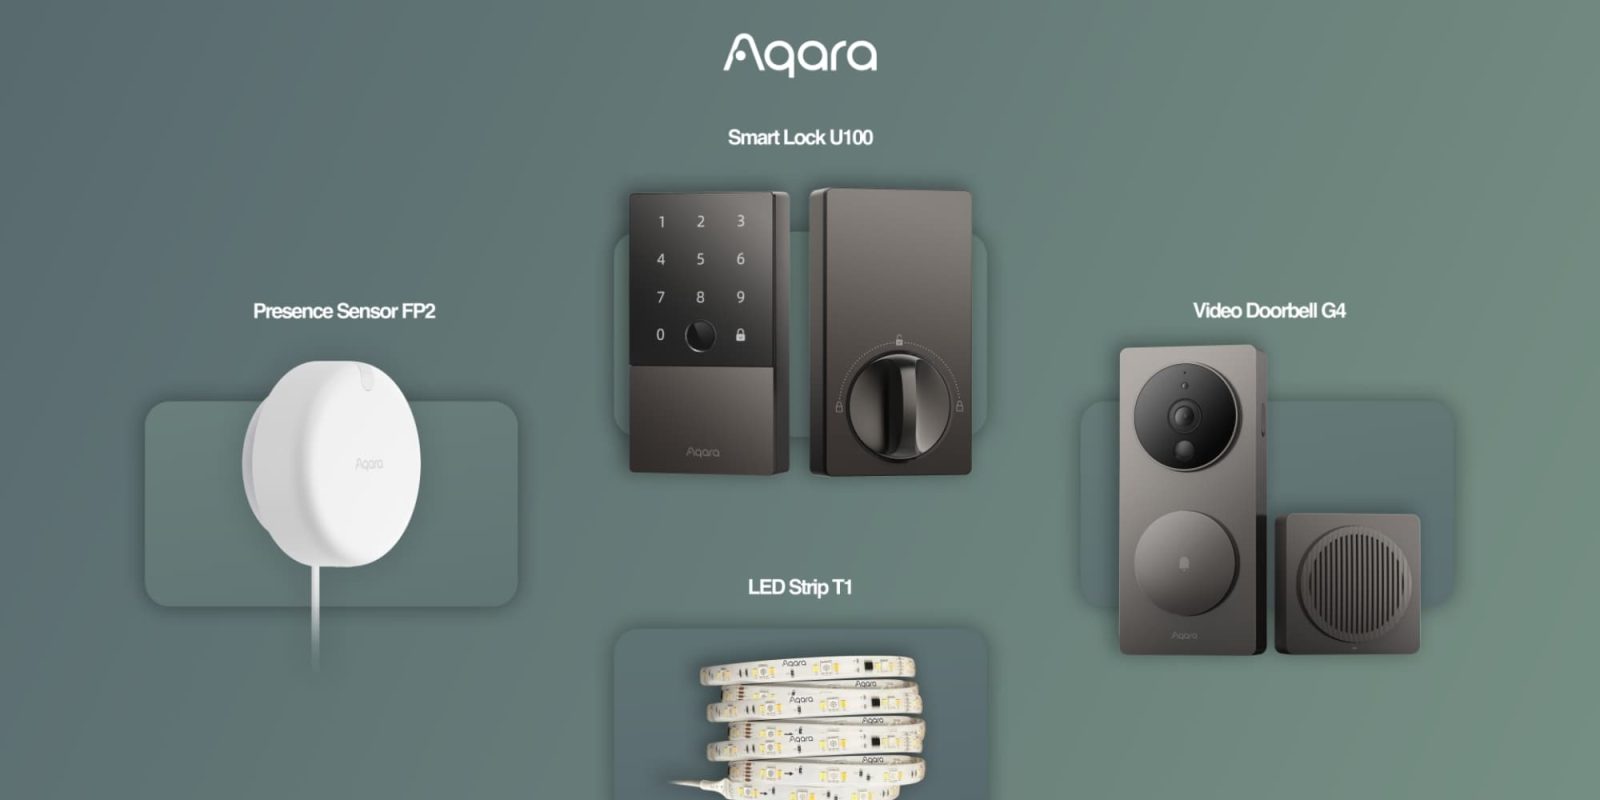 Aqara previews new HomeKit devices: smart door locks, led strips, and more